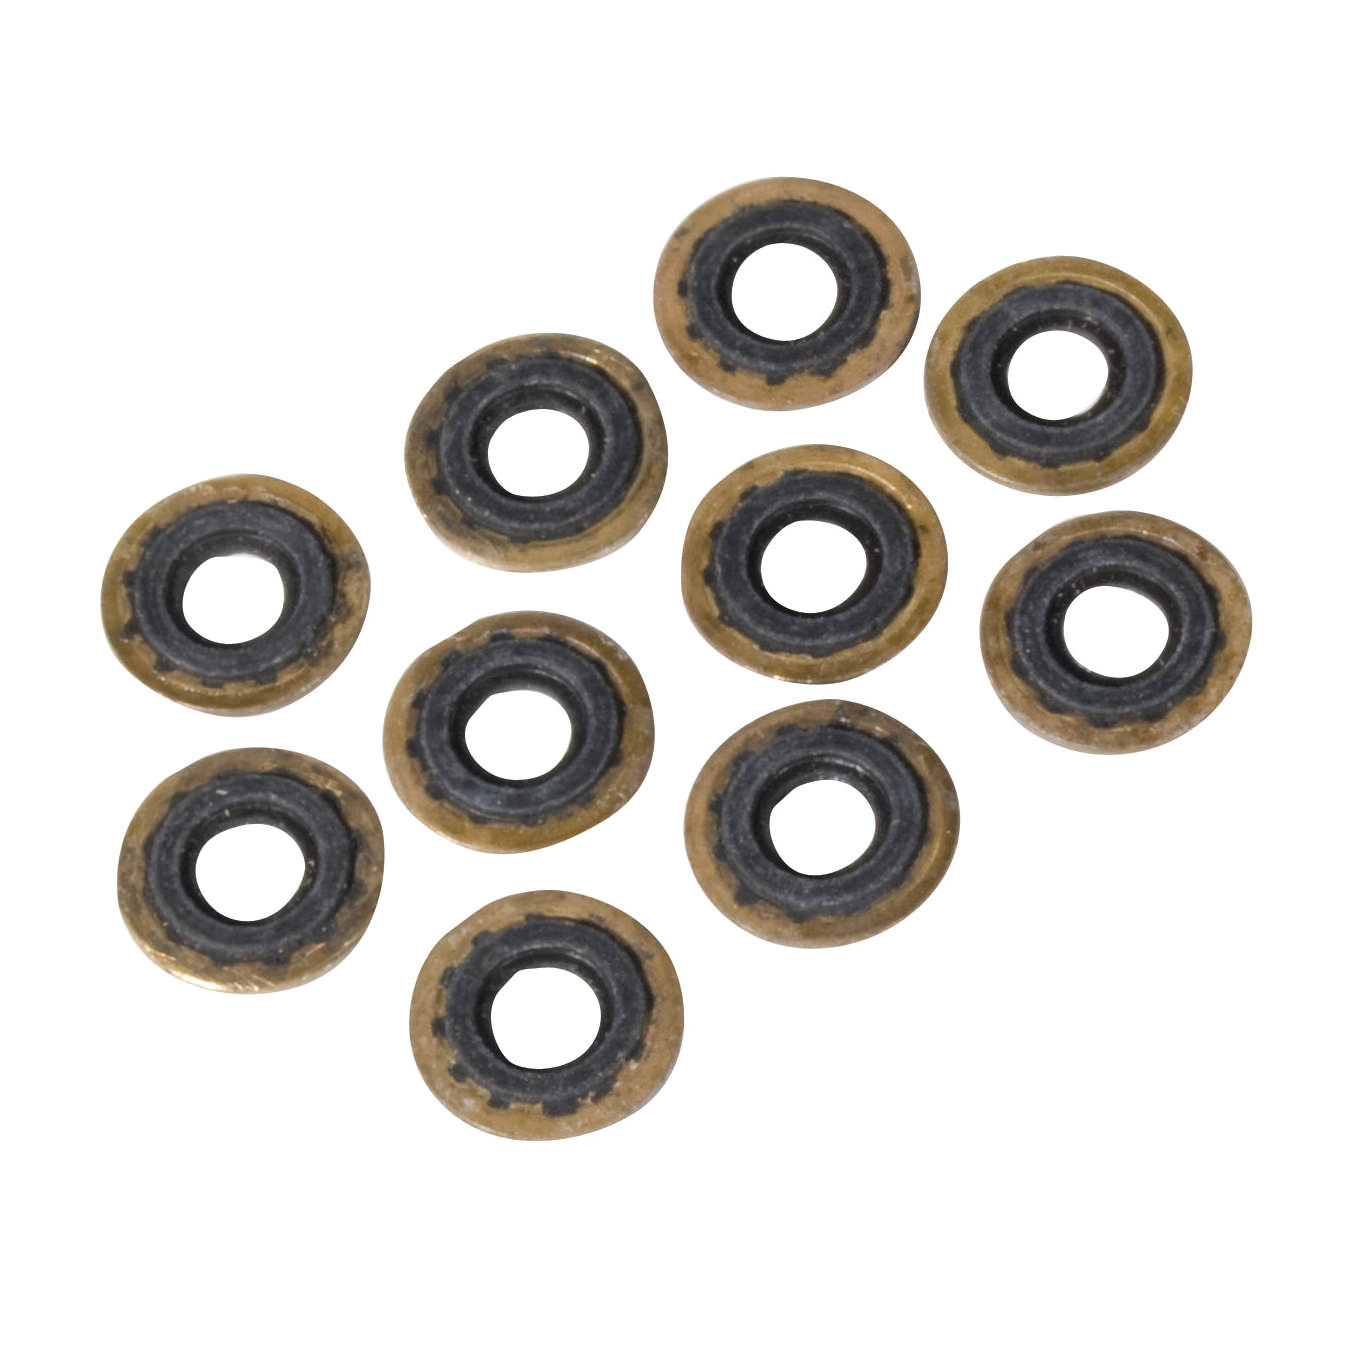 Replacement O-Rings for Oxygen Regulators (Bag of 10)